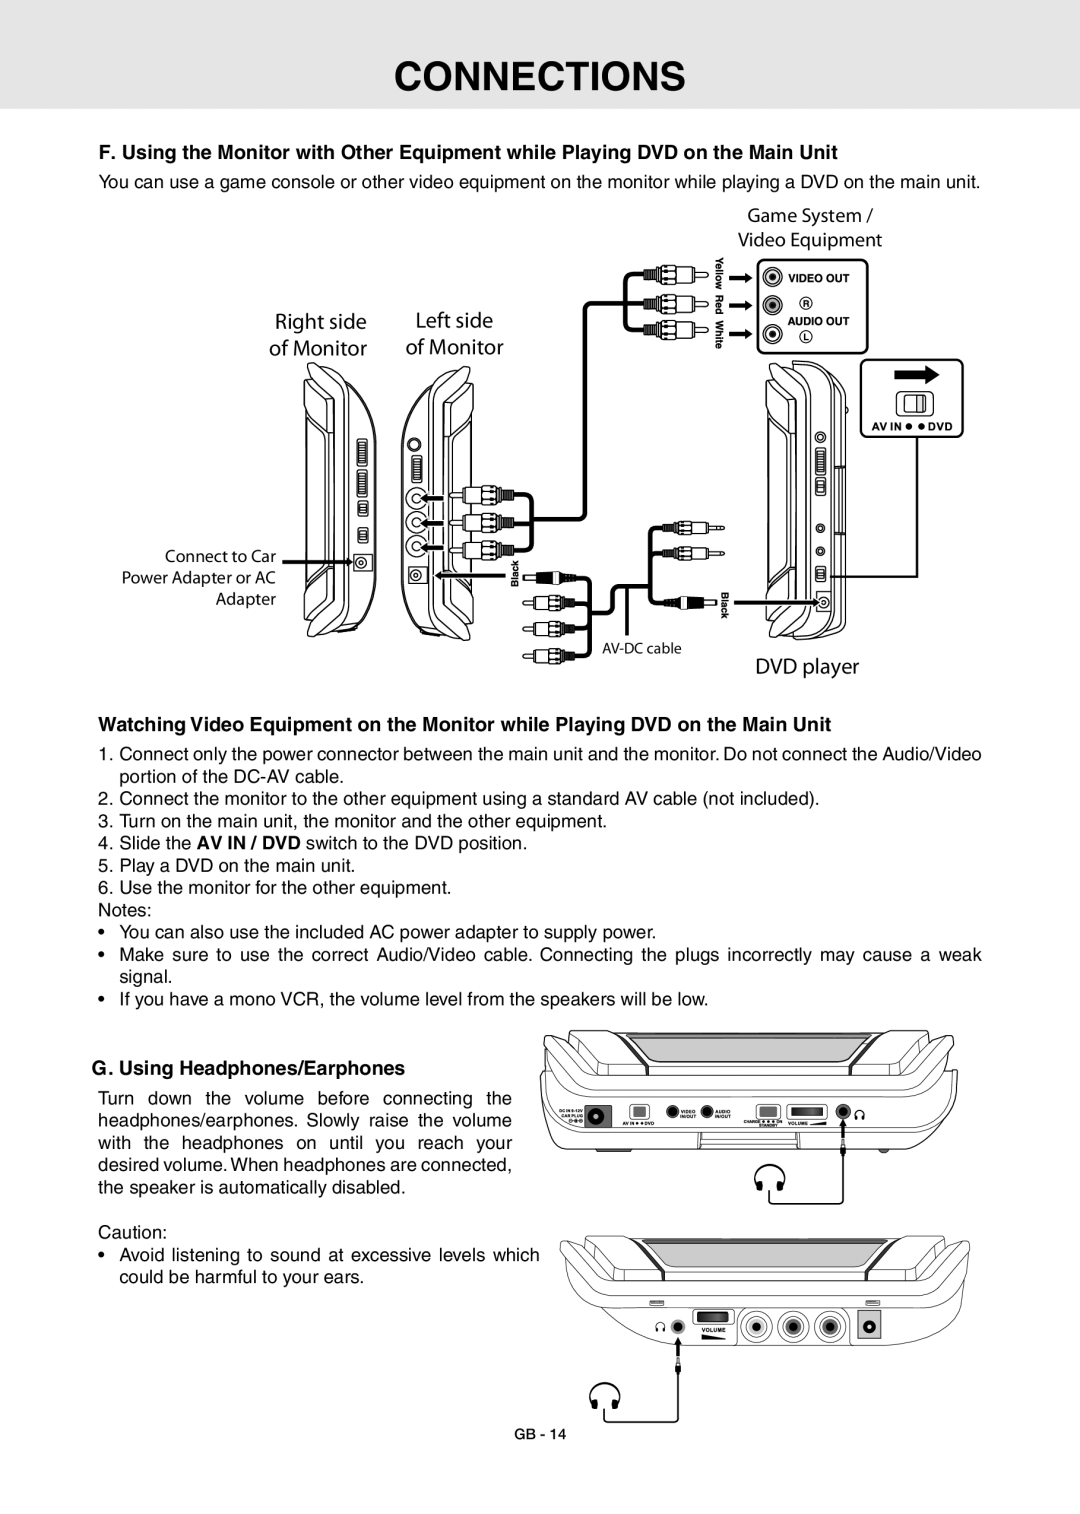 RCA DRC6389T owner manual of Monitor, G. Using Headphones/Earphones, Connections, DVD player 